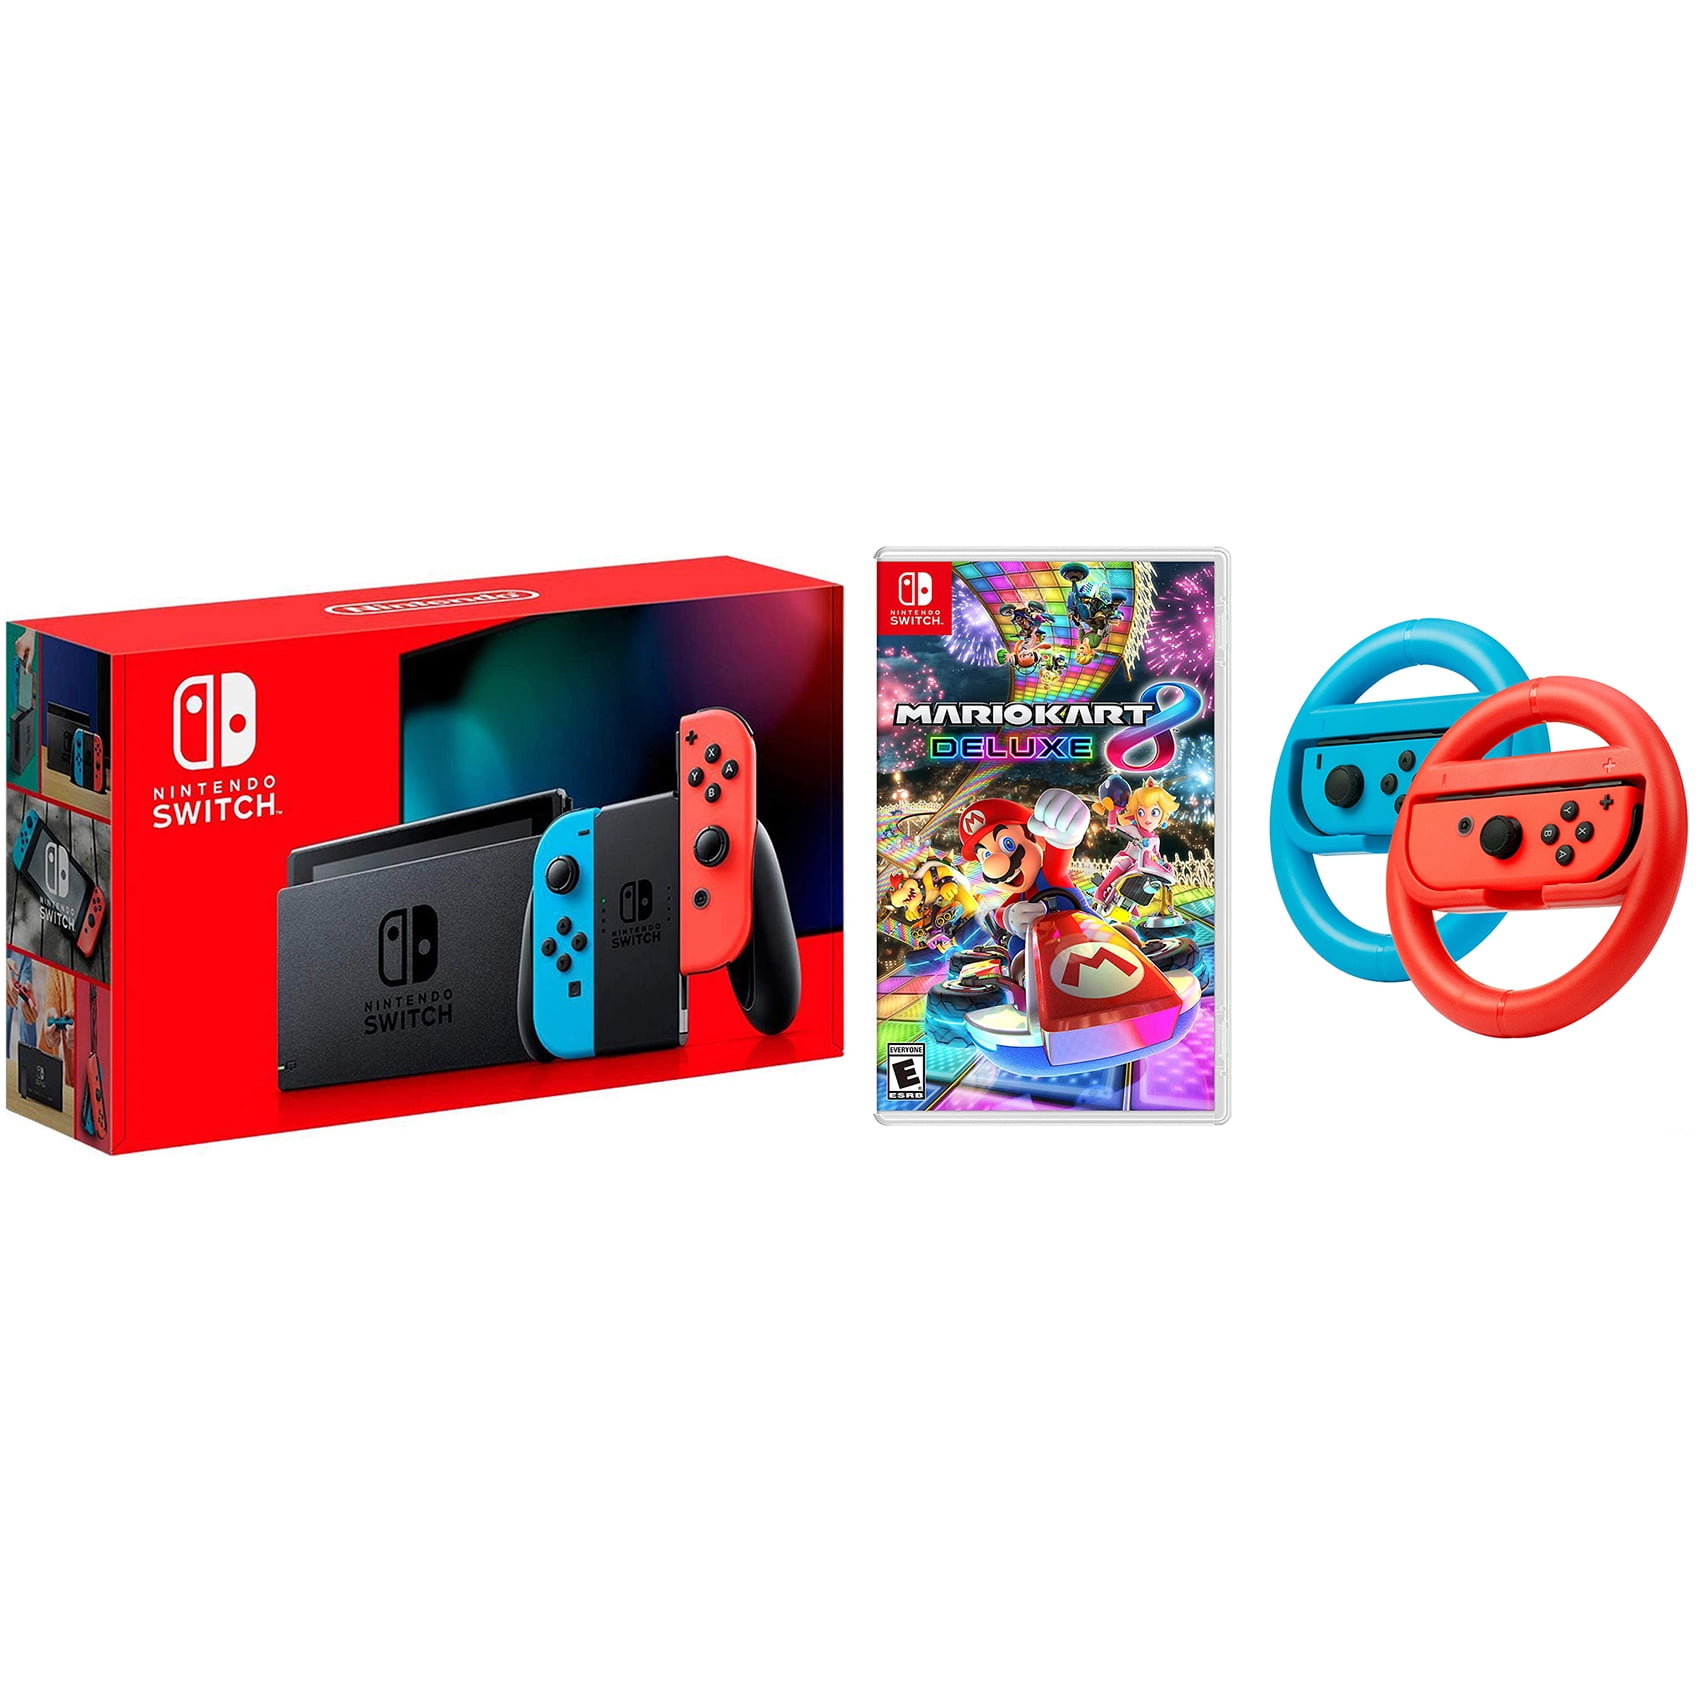 Nintendo Switch Console Neon Red & Blue with Mario Kart 8 Deluxe